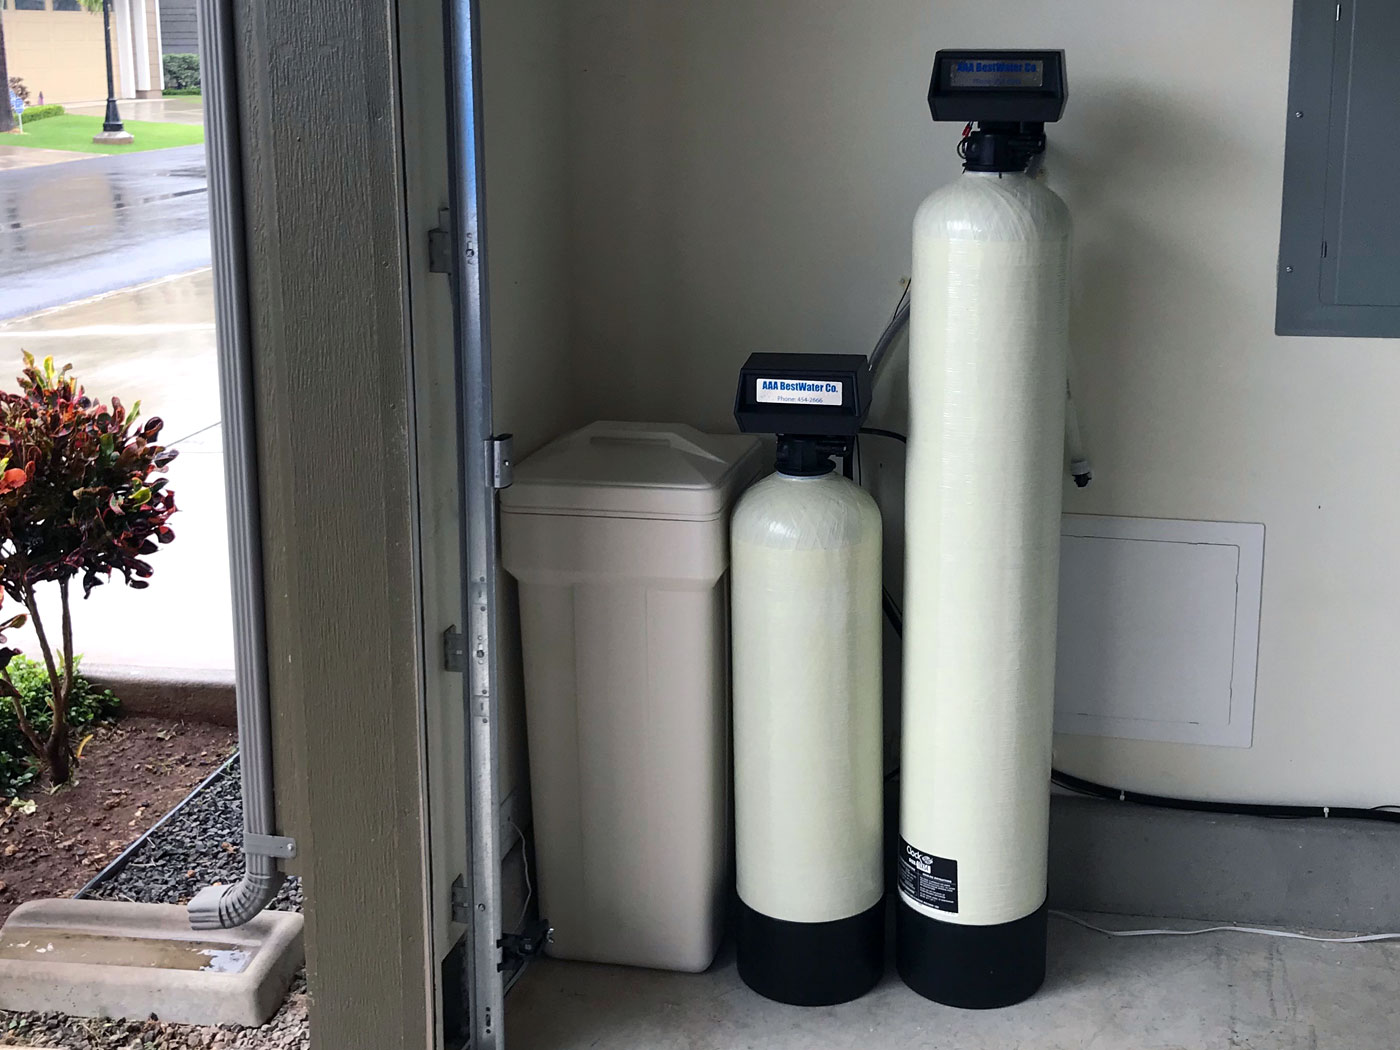 water softener and gac filtering units